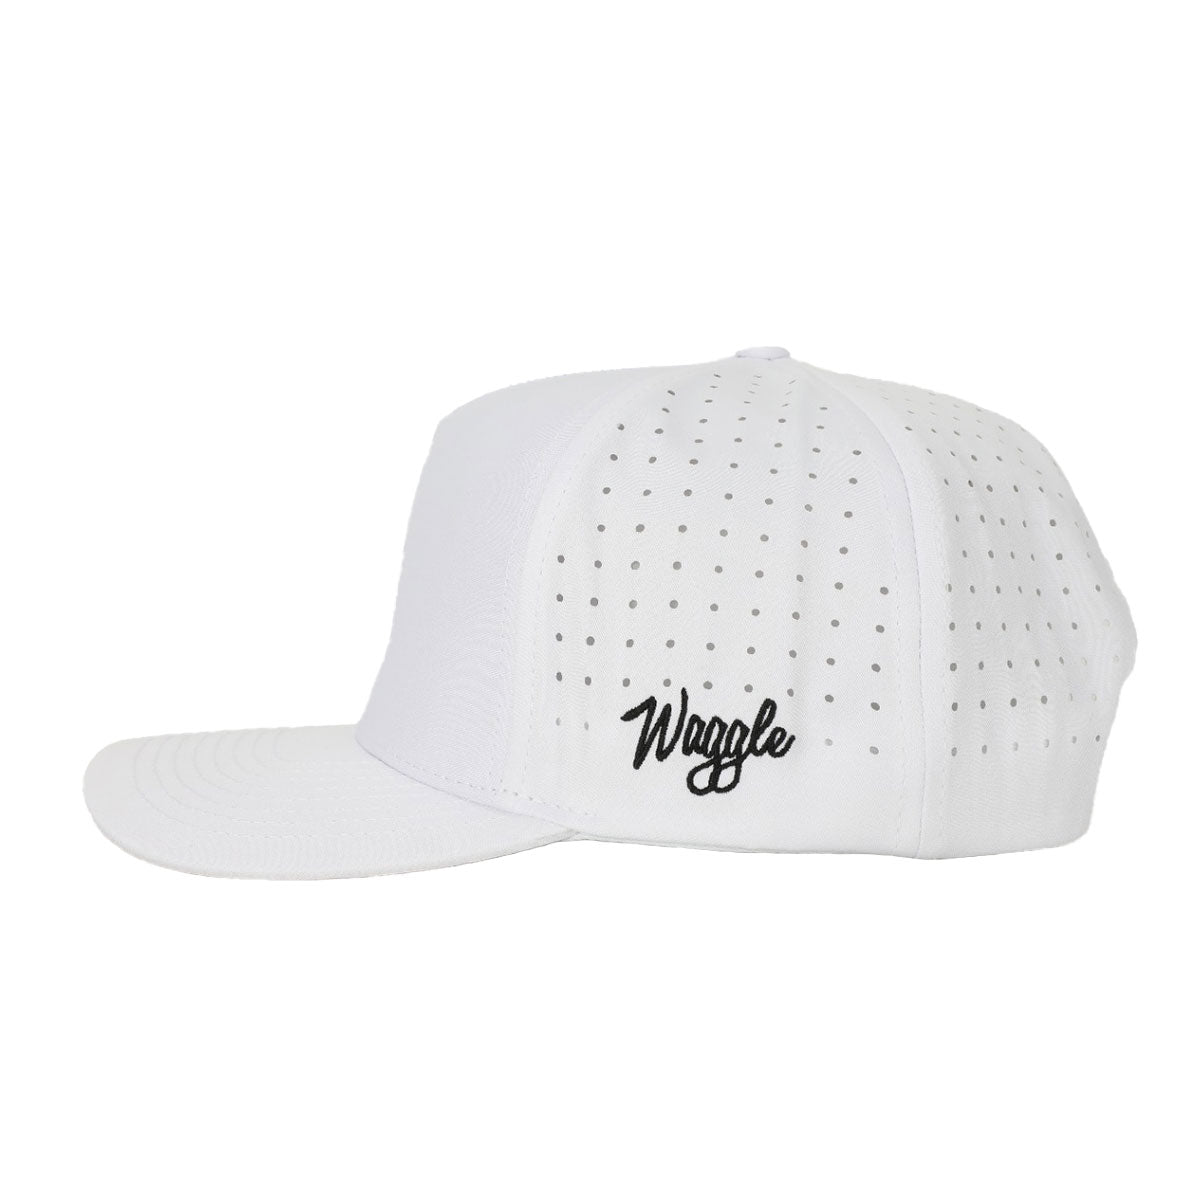 Waggle White Hat - Sample